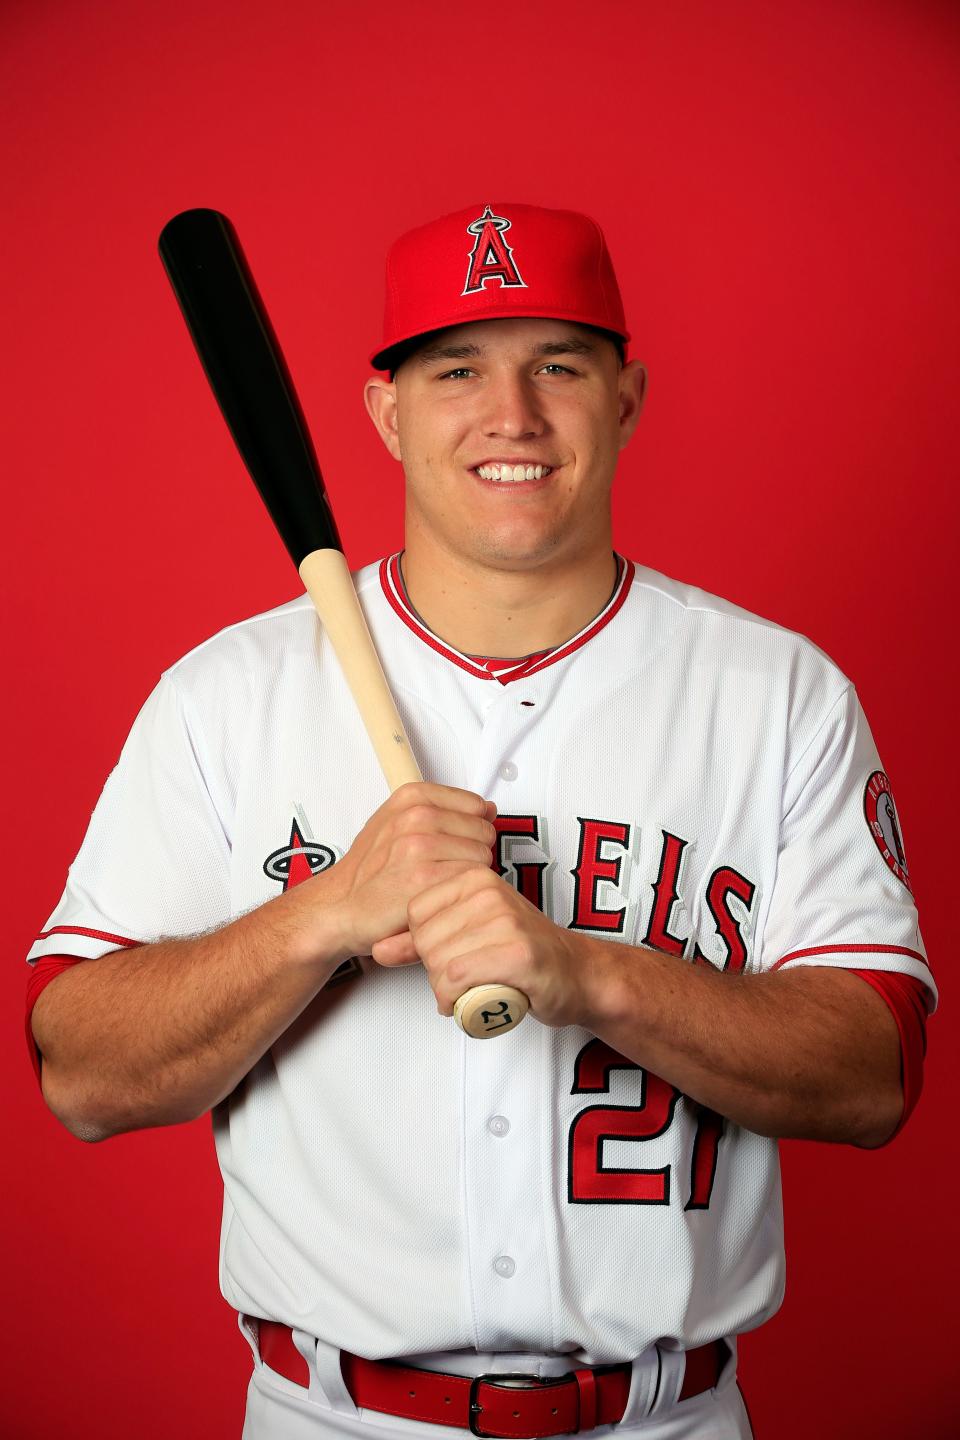 Mike Trout poses during Los Angeles Angels of Anaheim photo Day in Tempe, Arizona.